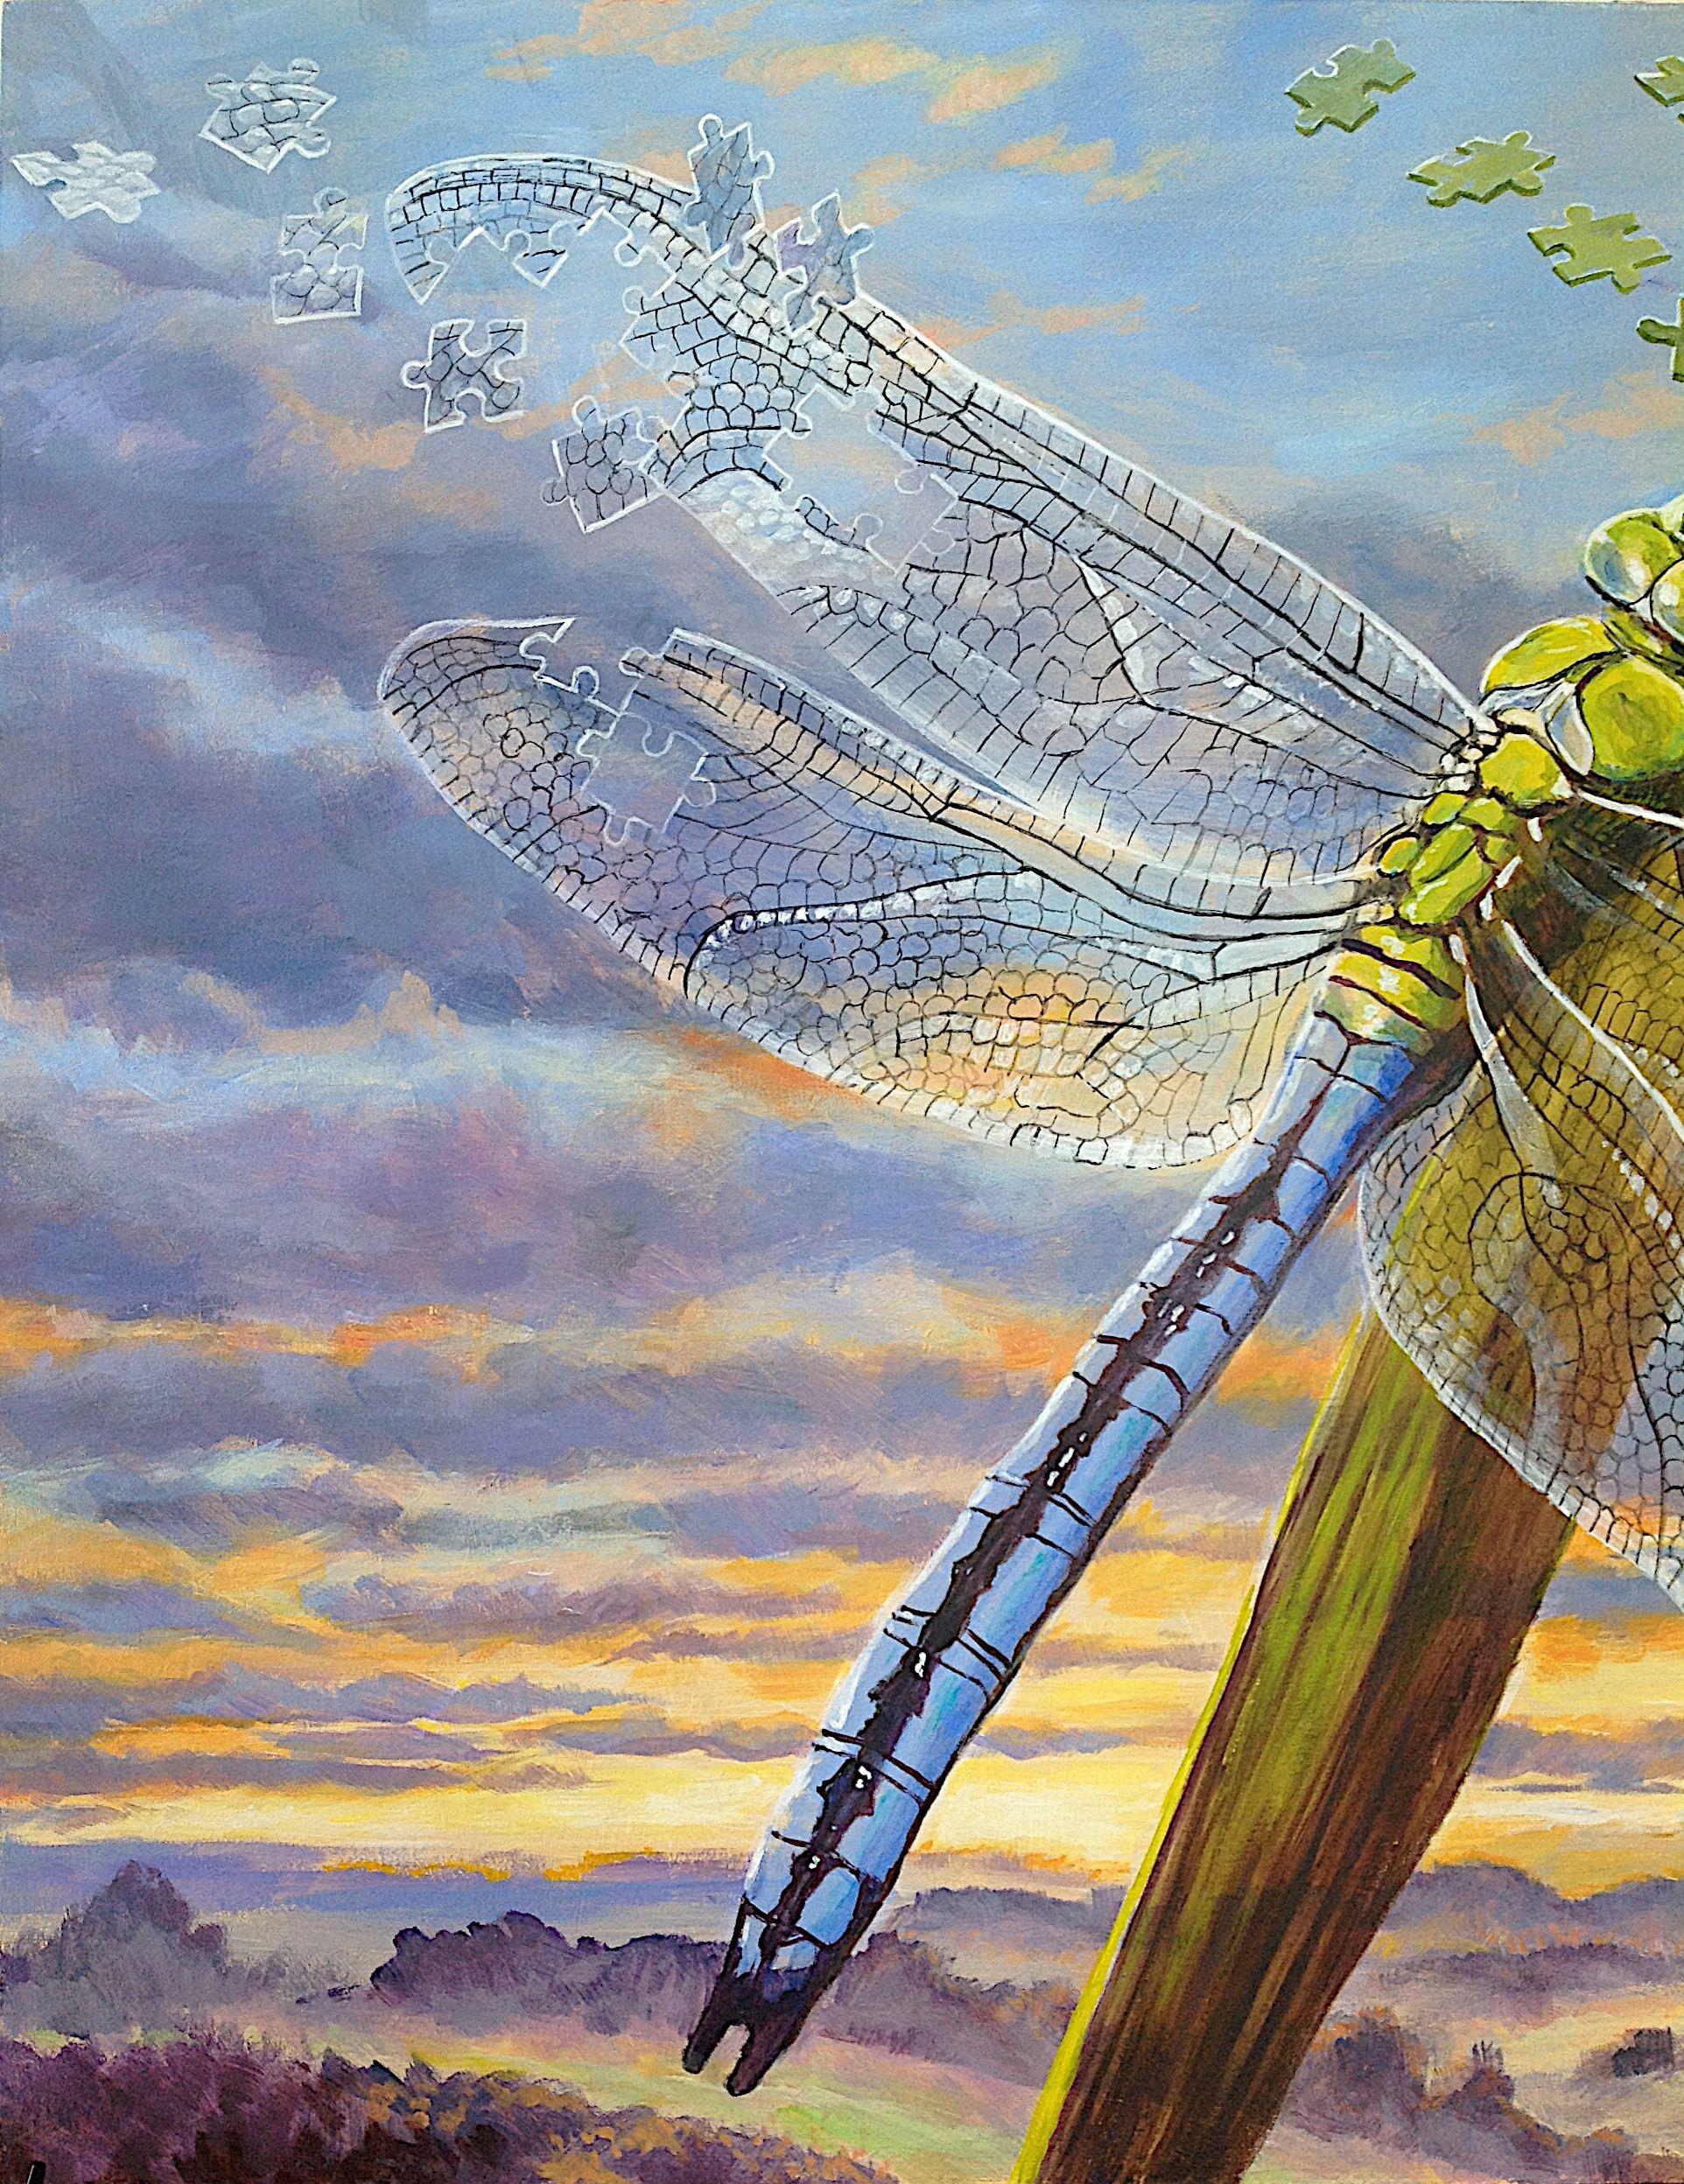 Like the previous butterfly paintings the dragonfly is painted as though it were a living jigsaw which is disintegrating into the wind. The dragonfly symbolises life on earth, complex pieces of a puzzle created by nature that fit together